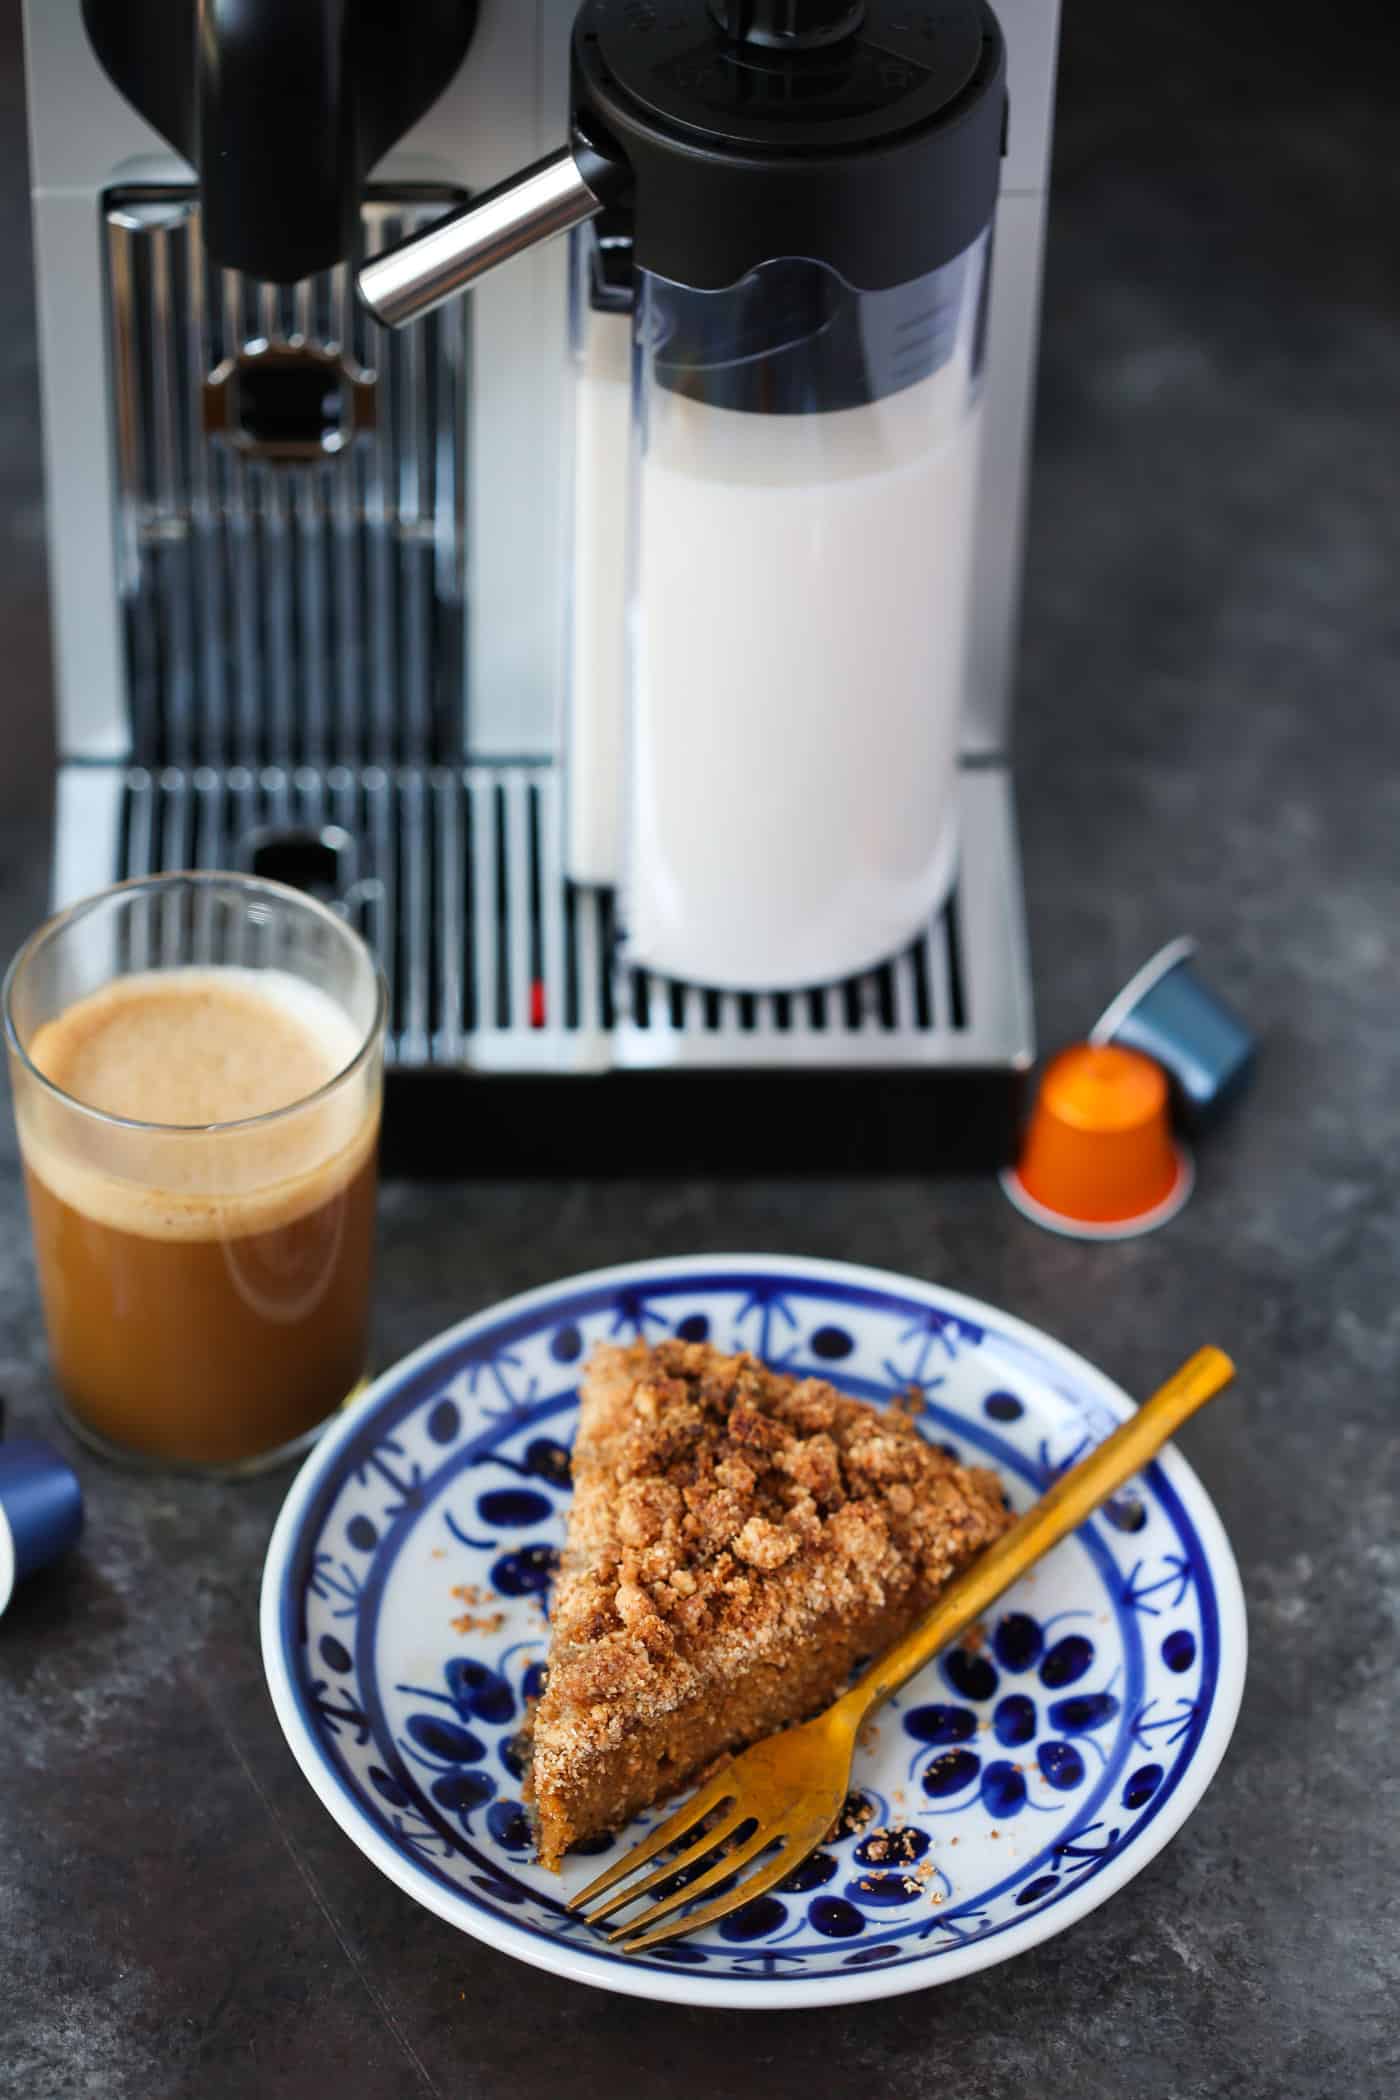 Who is ready for fall baking? How about starting off with this Gluten-Free Pumpkin Coffee Cake? It's made with almond and coconut flour, pumpkin puree and flavourful spices. 